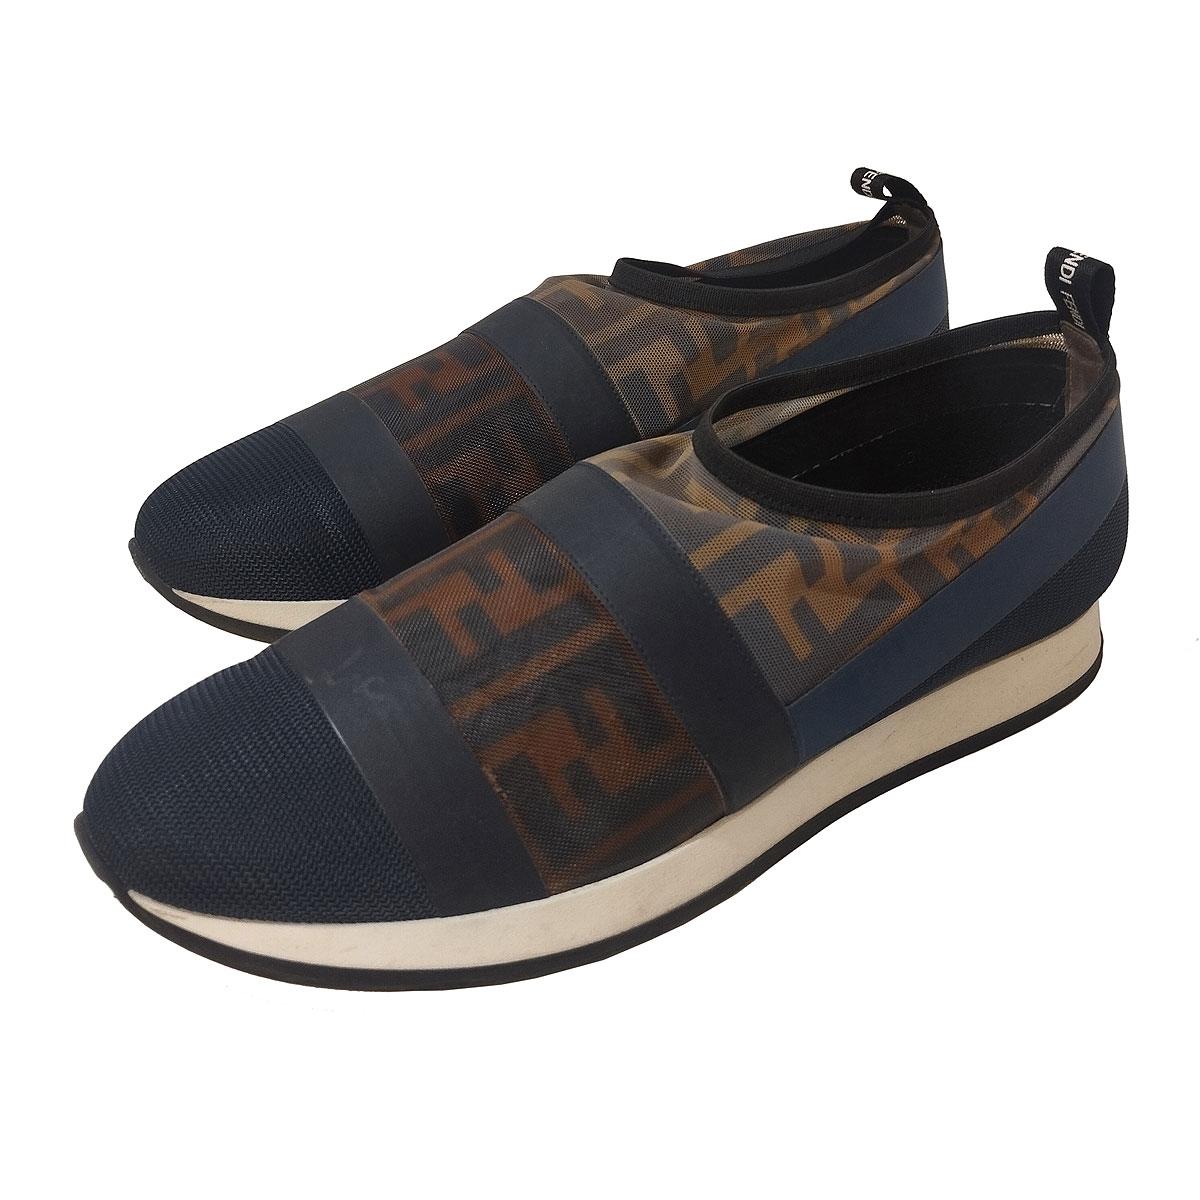 Slip on zucca
Textile
FF Logo
Blue color
Original price € 720
Fast shipping from Italy